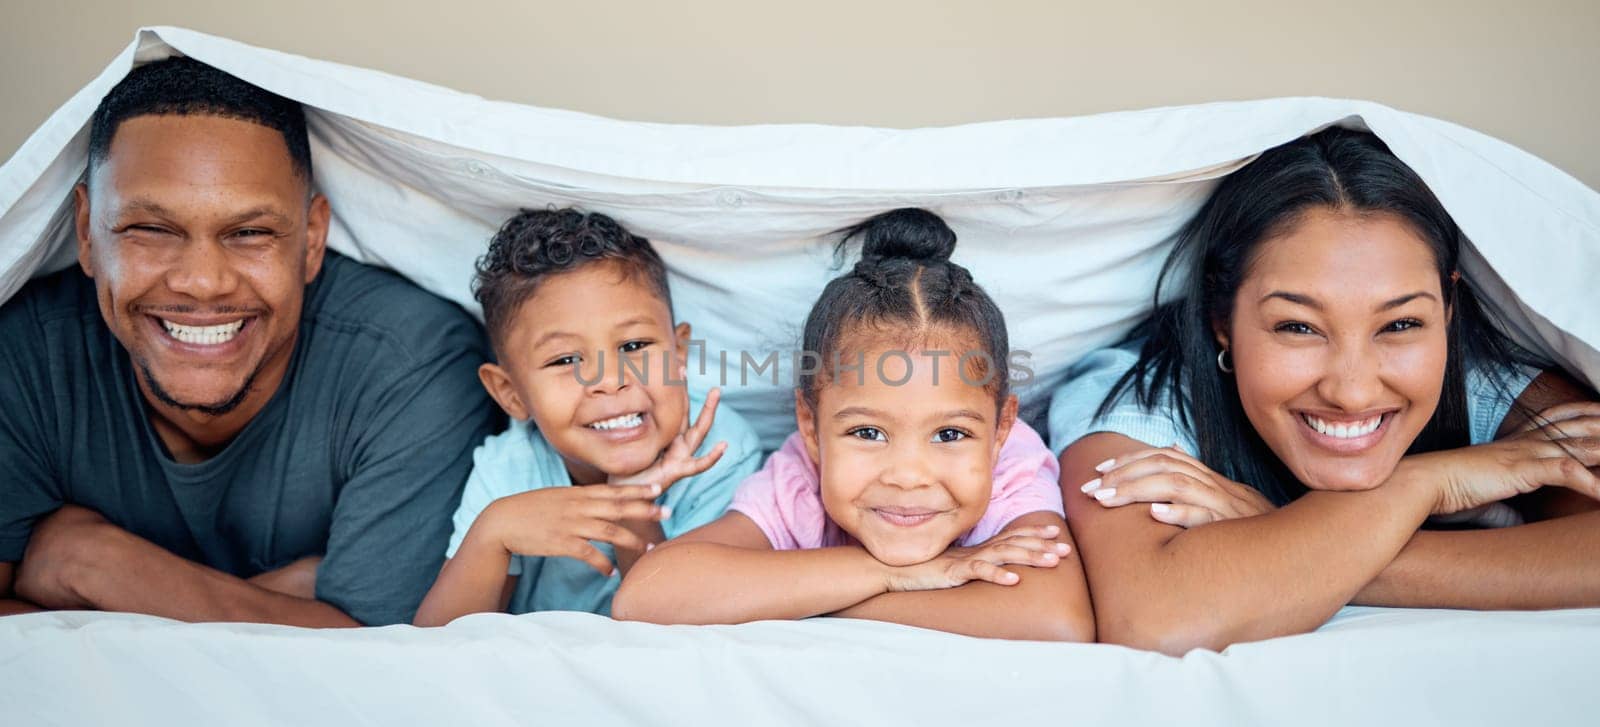 Love, blanket and happy family in bed together for quality time, care and support with smile. Relax, parents and children portrait for relationship bonding happiness lifestyle in family home bedroom.